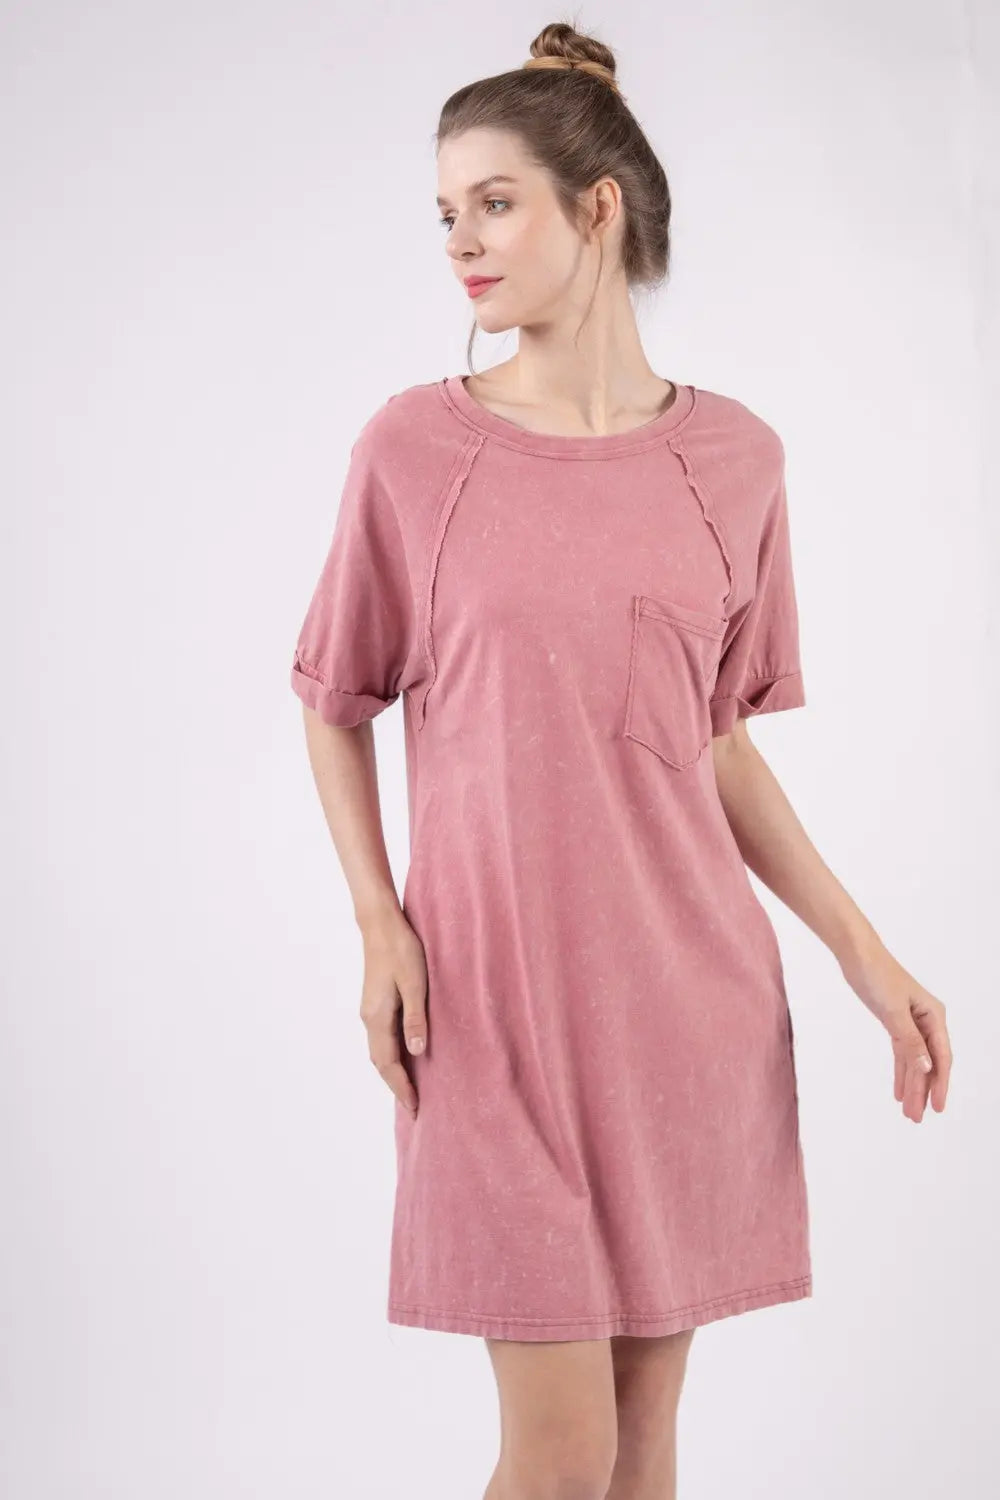 VERY J Washed Round Neck Mini Tee Dress  Hot Trends